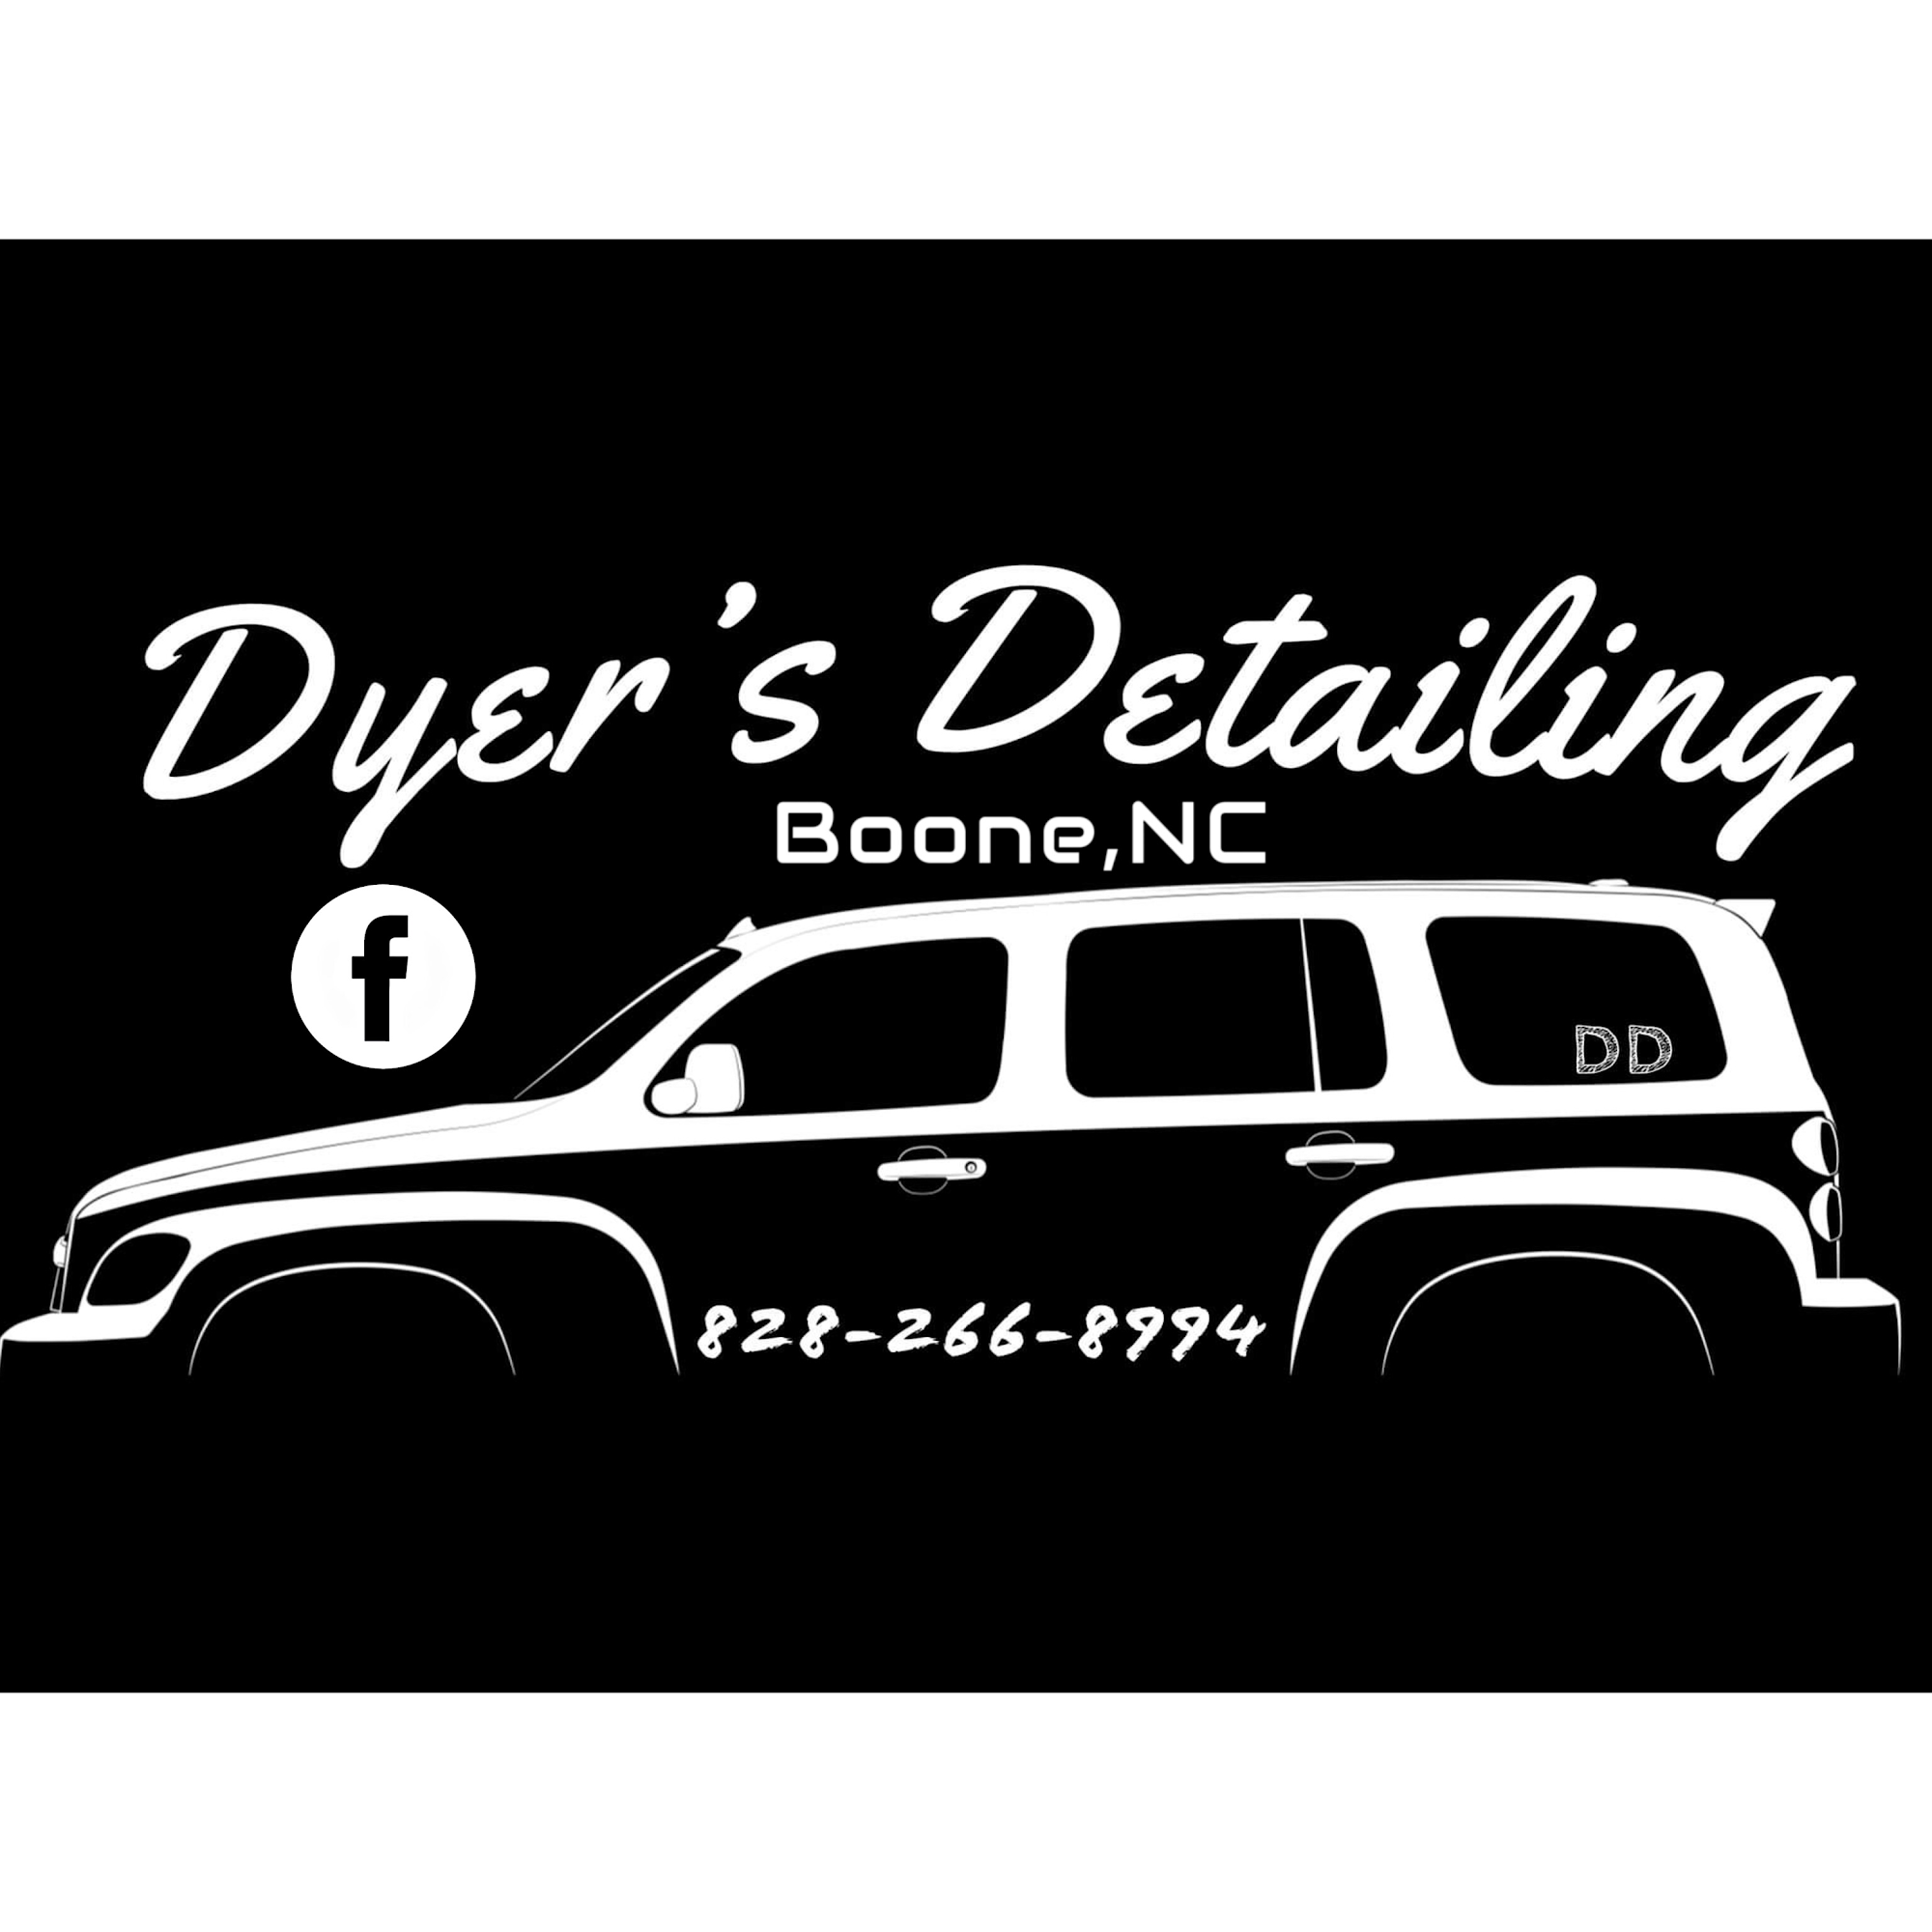 Dyer's Detailing